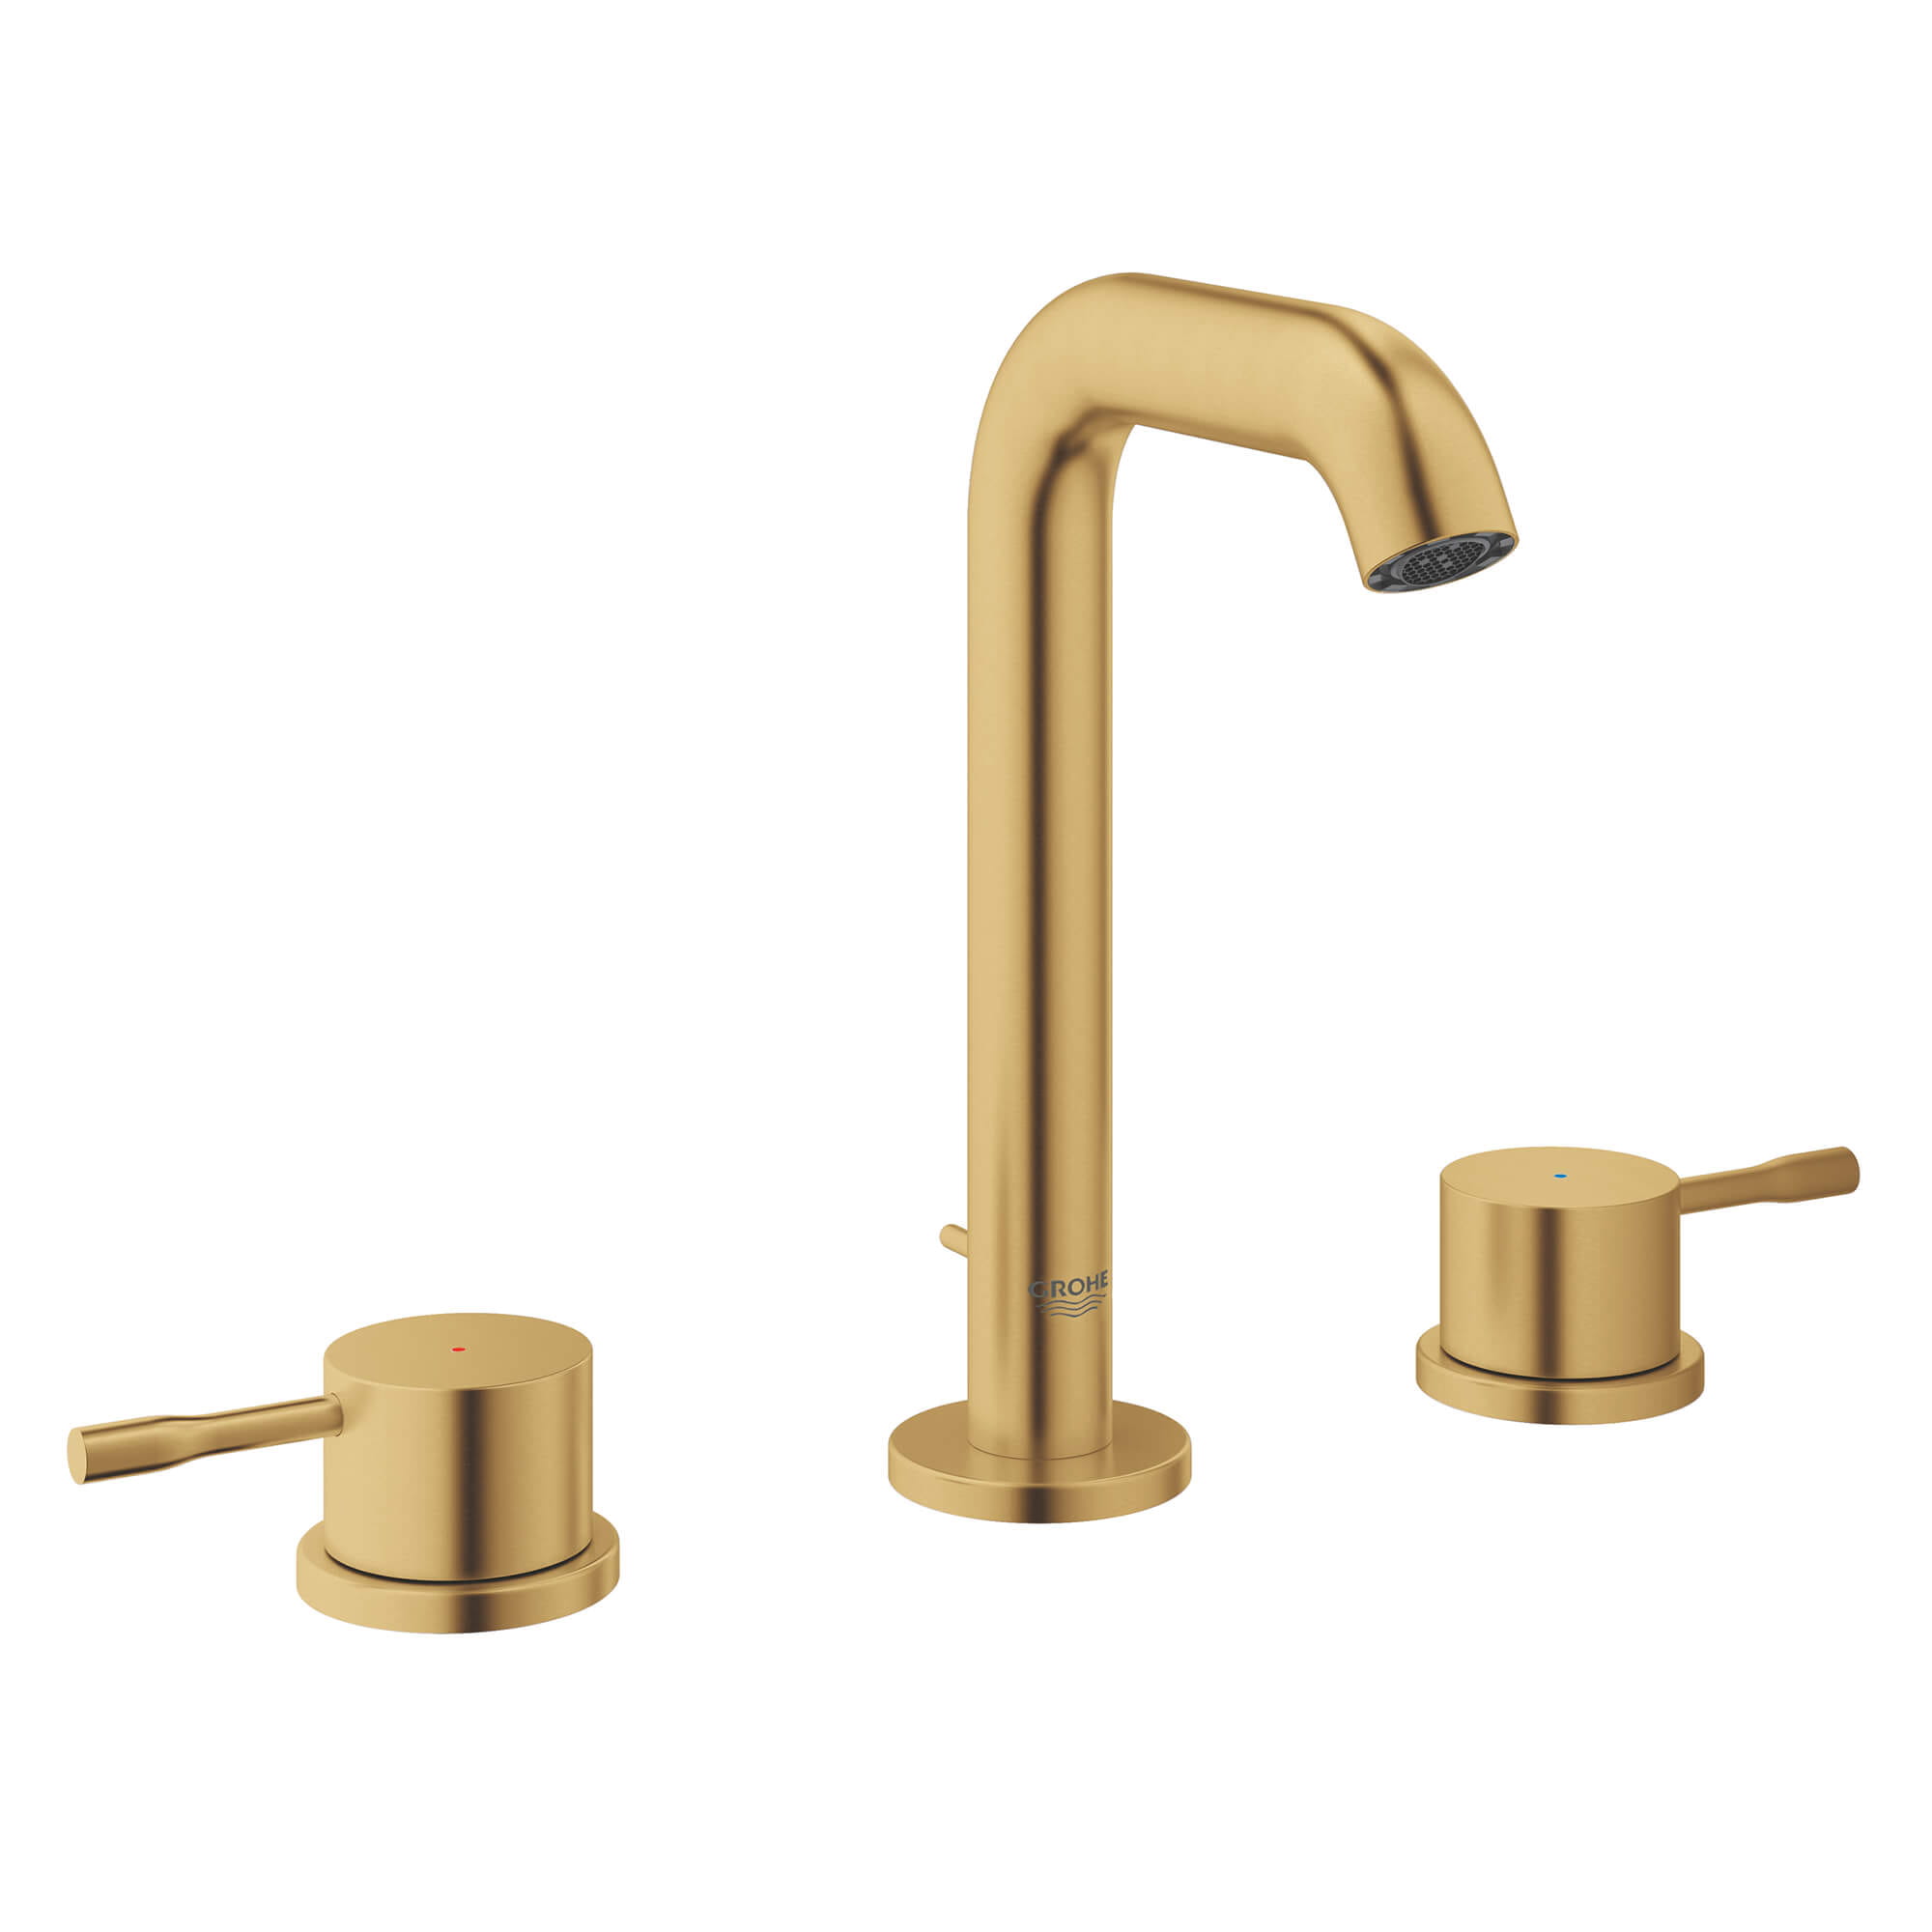 Copper Bathtub Triple Extended Foot Bathroom Faucet Fitting Replacement Accessor 